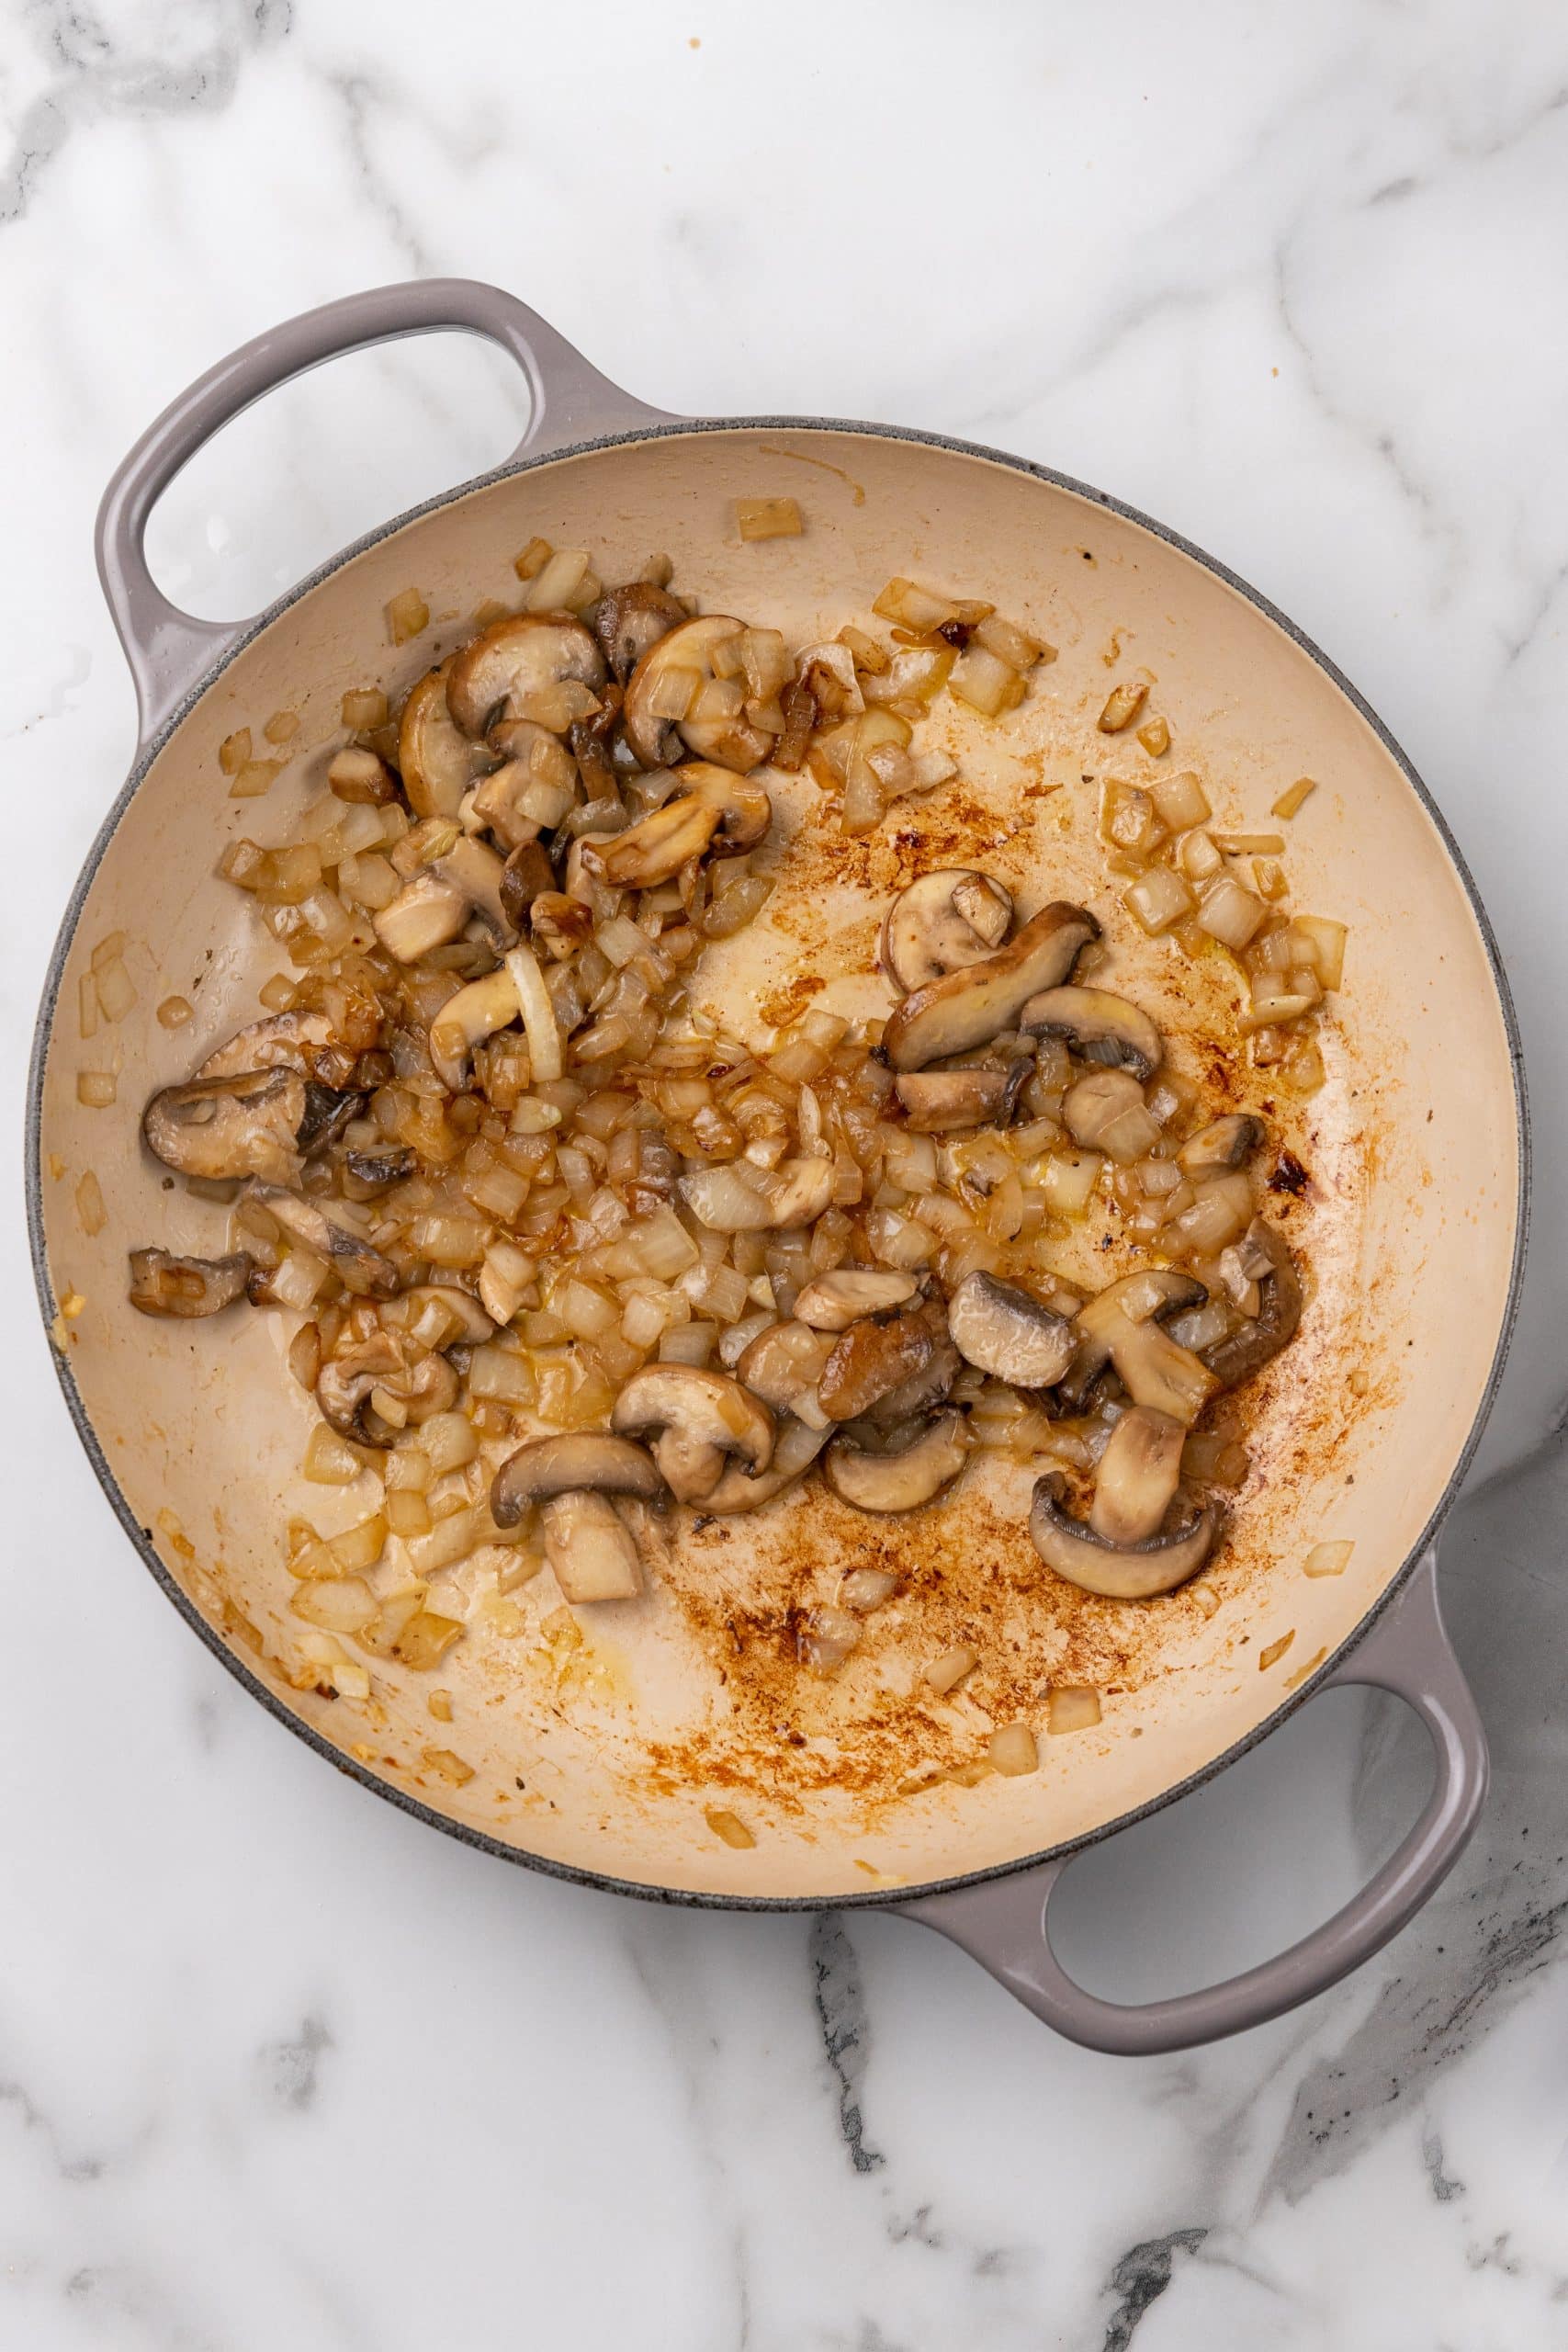 caramelized onions and sliced mushrooms in the bottom of a gray skillet